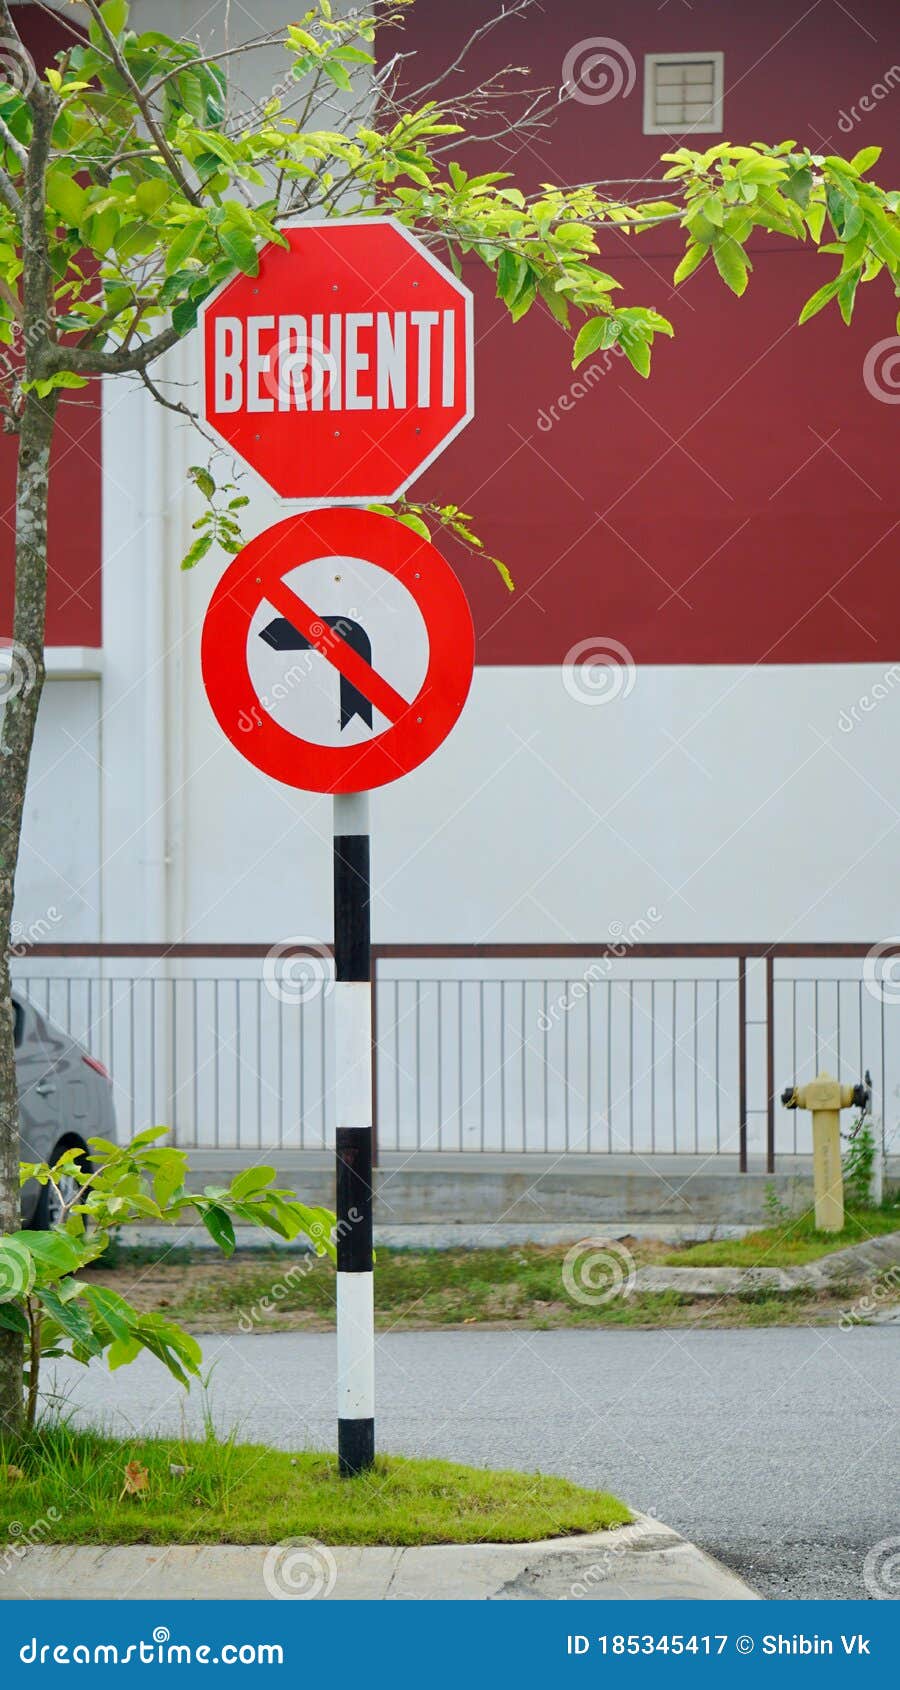 241 Turn Left Road Sign Board Photos Free Royalty Free Stock Photos From Dreamstime